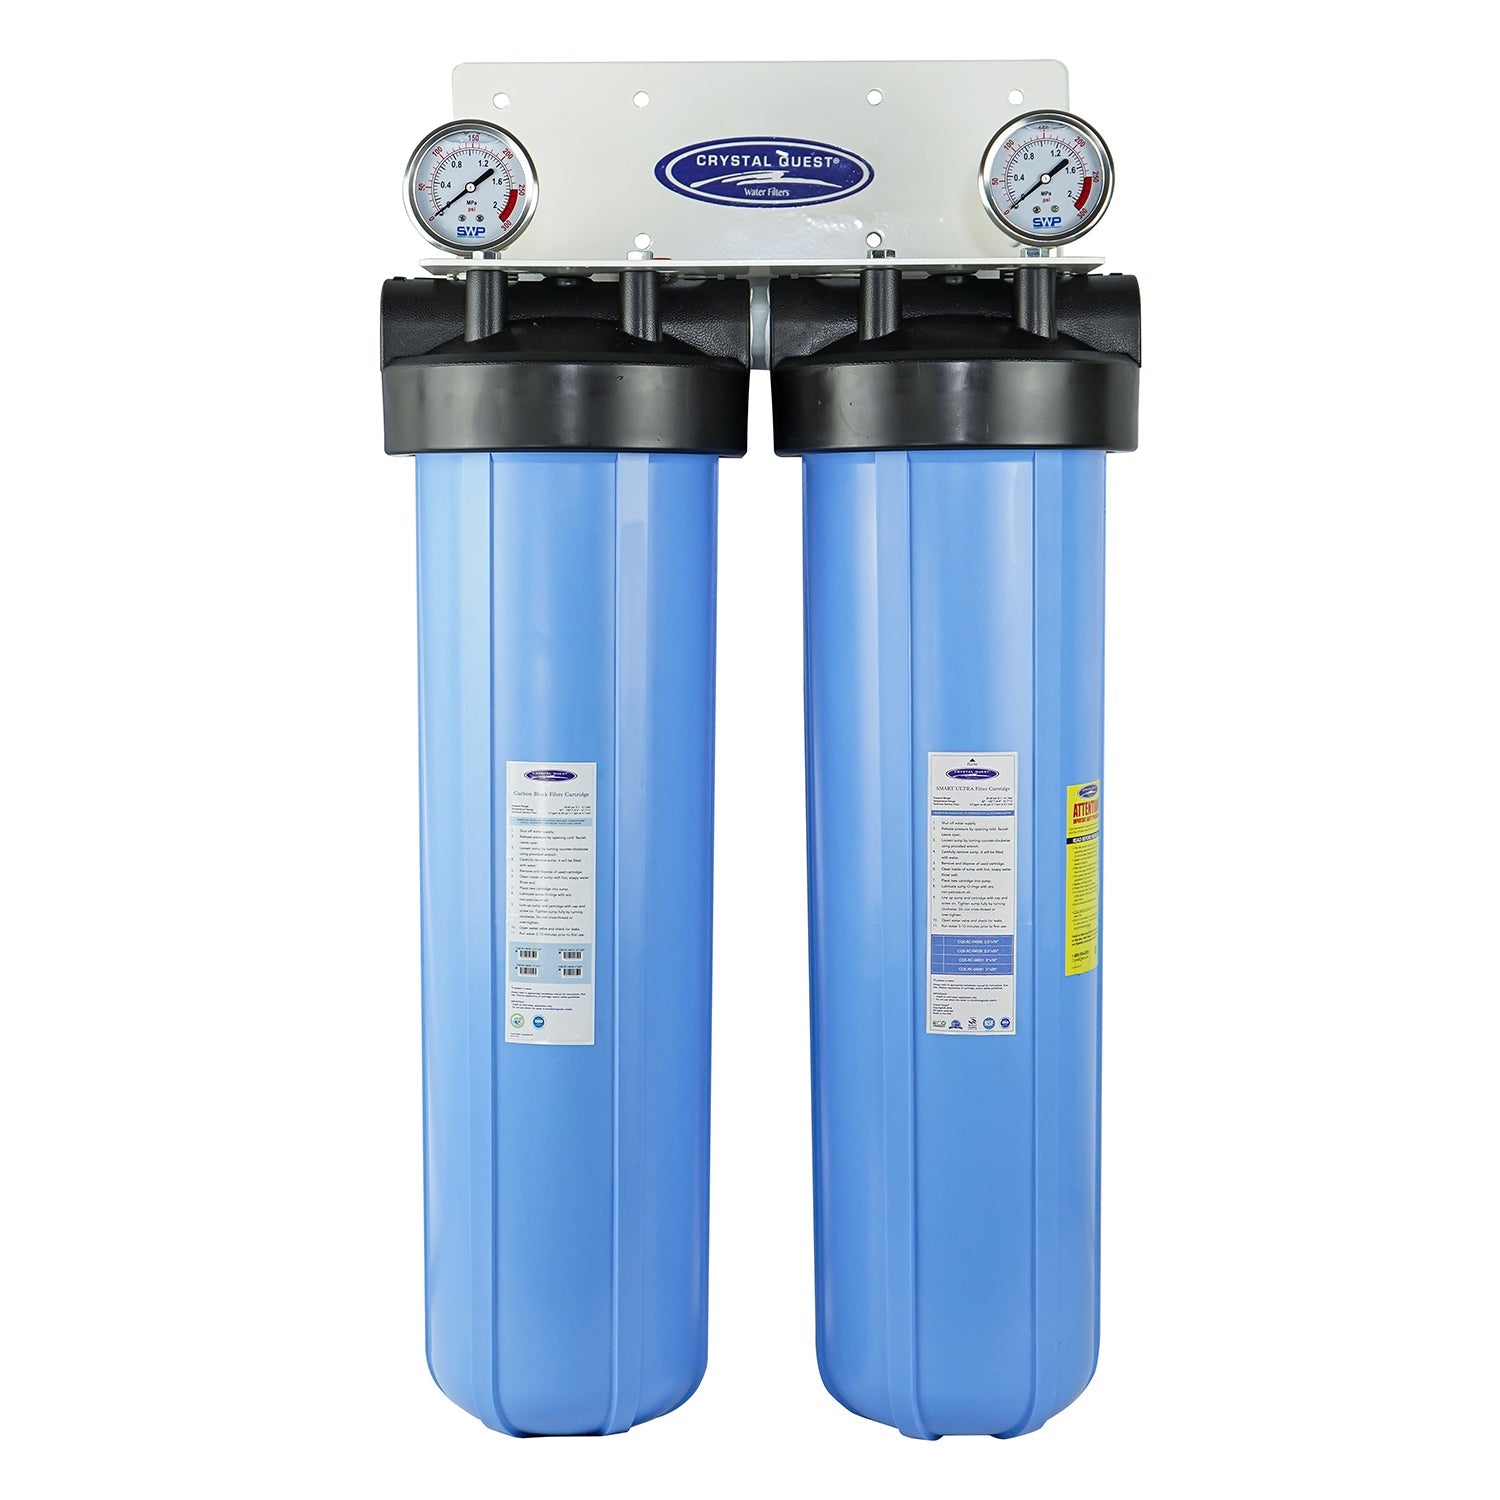 Crystal Quest Big Blue Whole House Water Filter Fluoride Removal Double